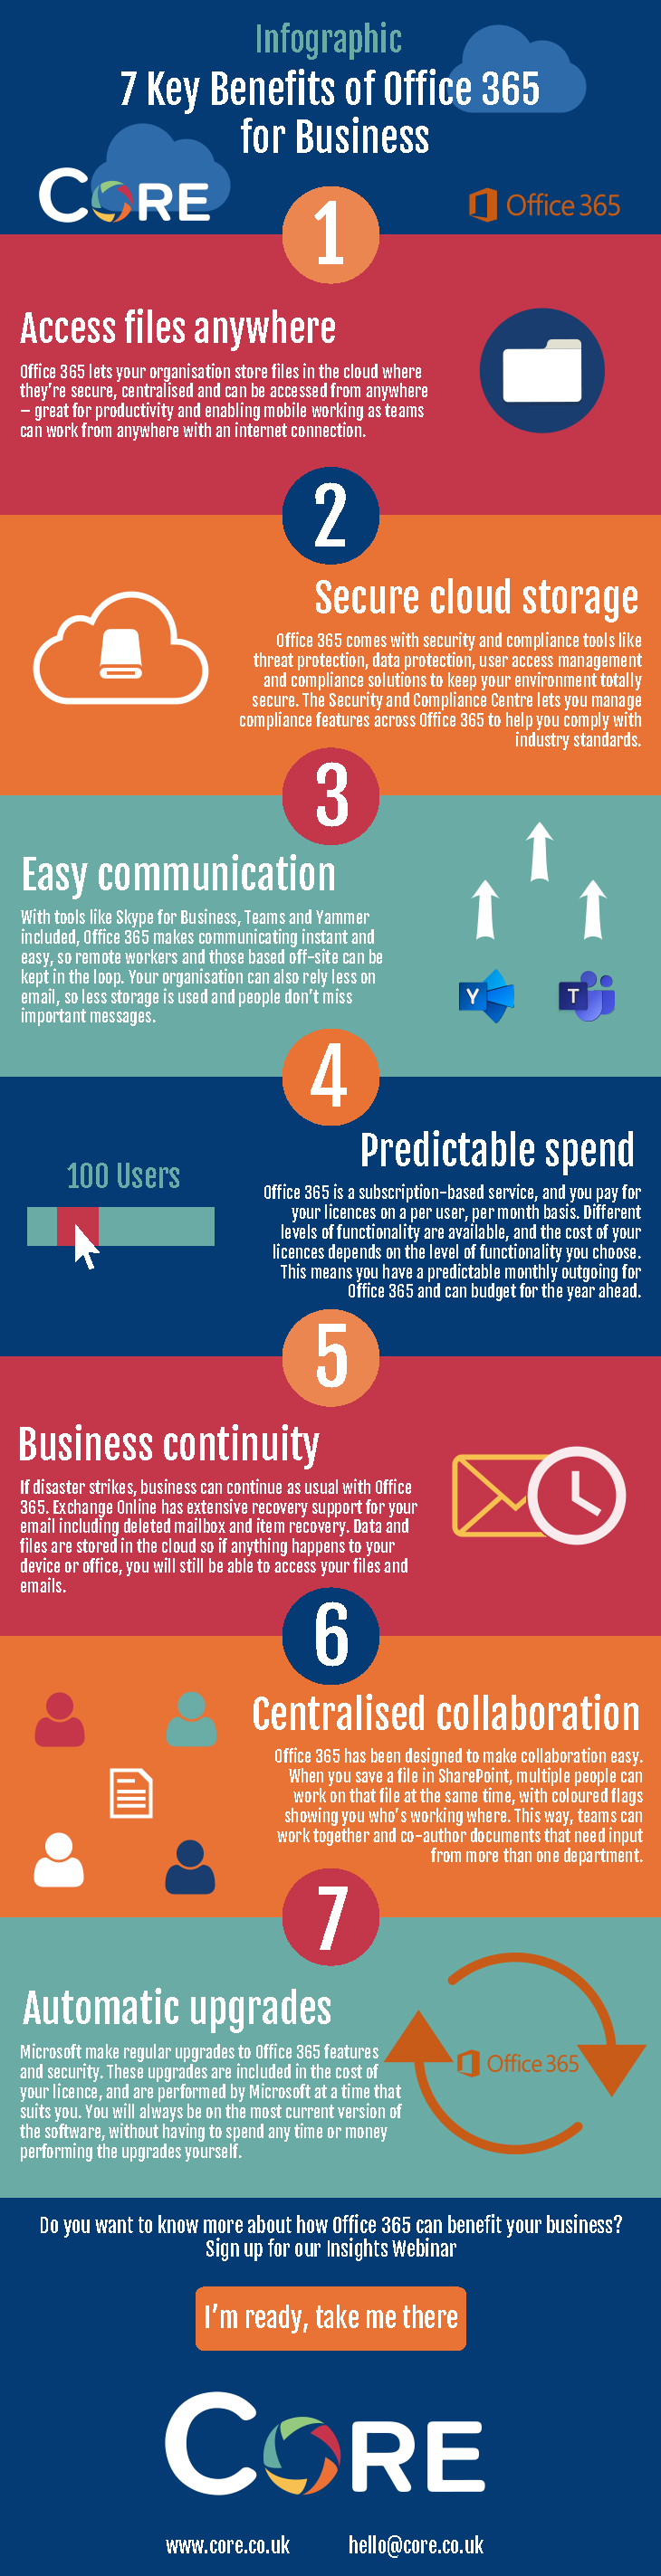 APPROVED - 7 Benefits of Office 365 for Business_Aug 19